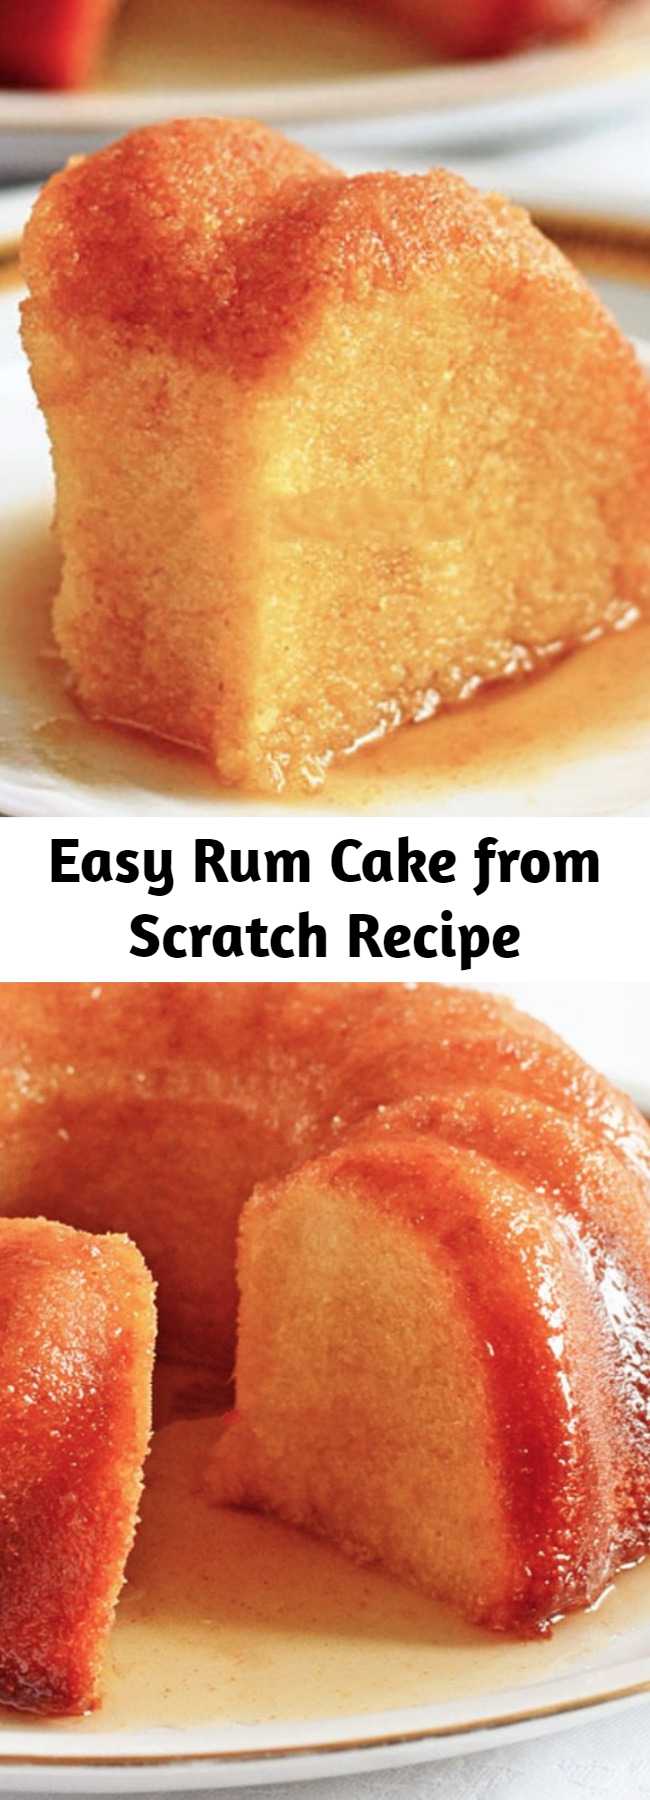 Easy Rum Cake from Scratch Recipe - Rum Cake from Scratch is dense, rich and soaked with flavorful thick butter rum sauce. Great for every party!